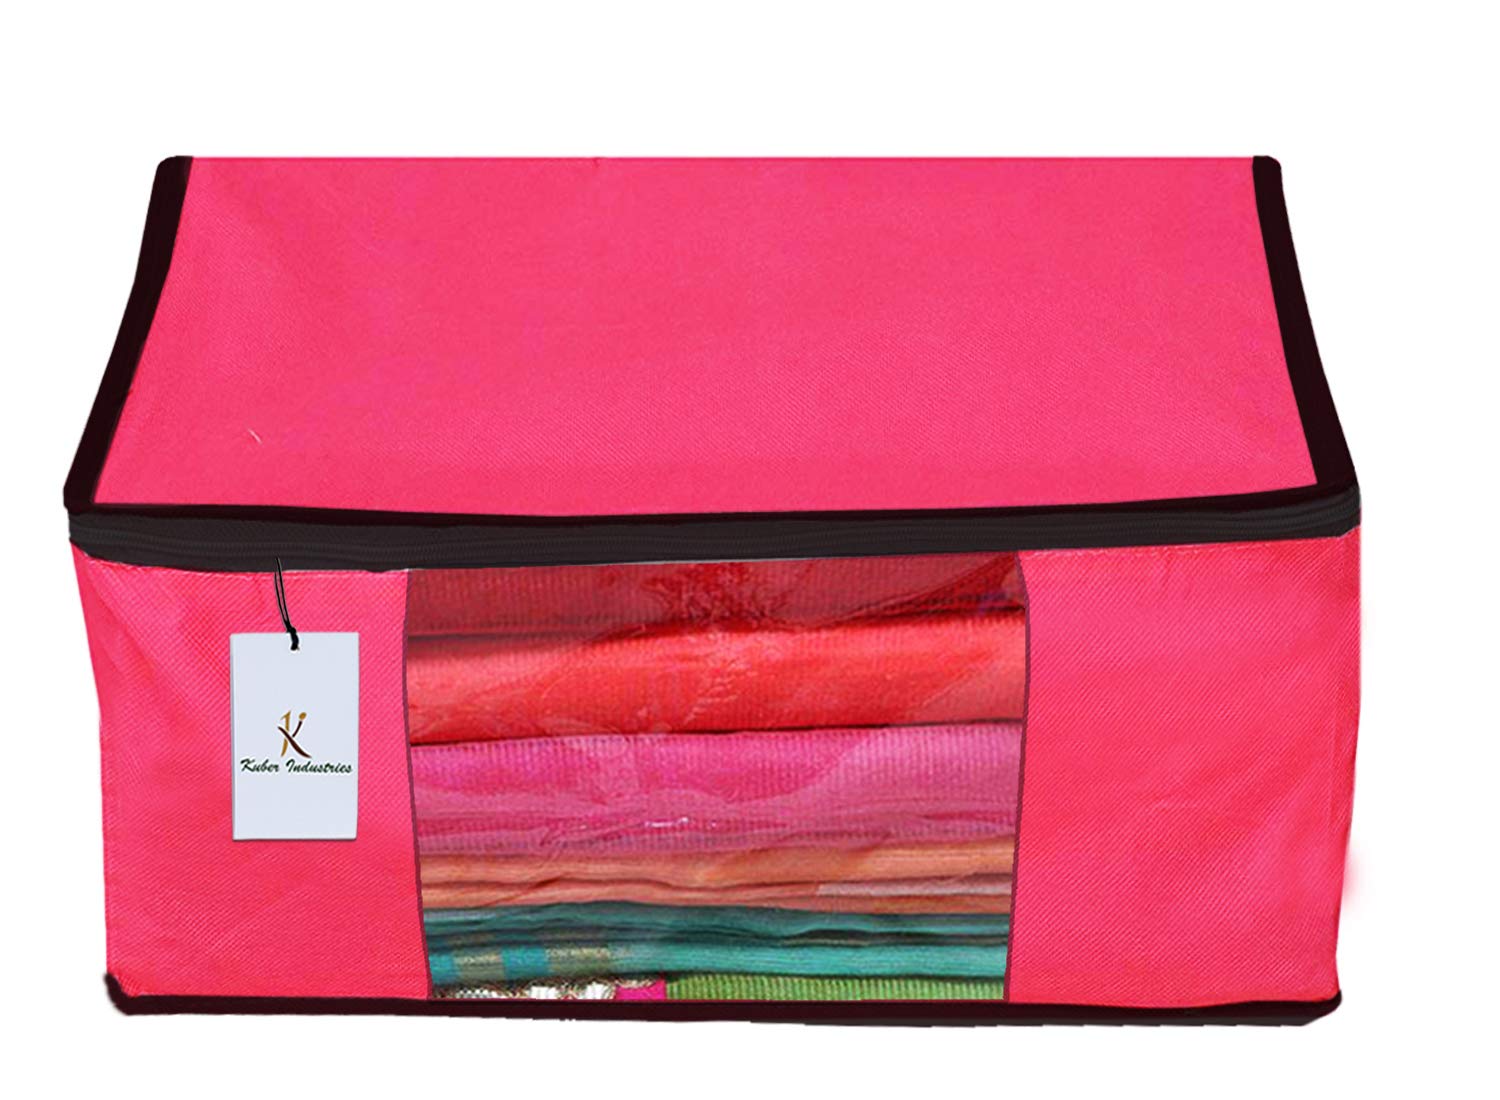 Kuber Industries 3 Piece Non Woven Fabric Saree Cover Set with Transparent Window, Extra Large, Pink-CTKTC23670